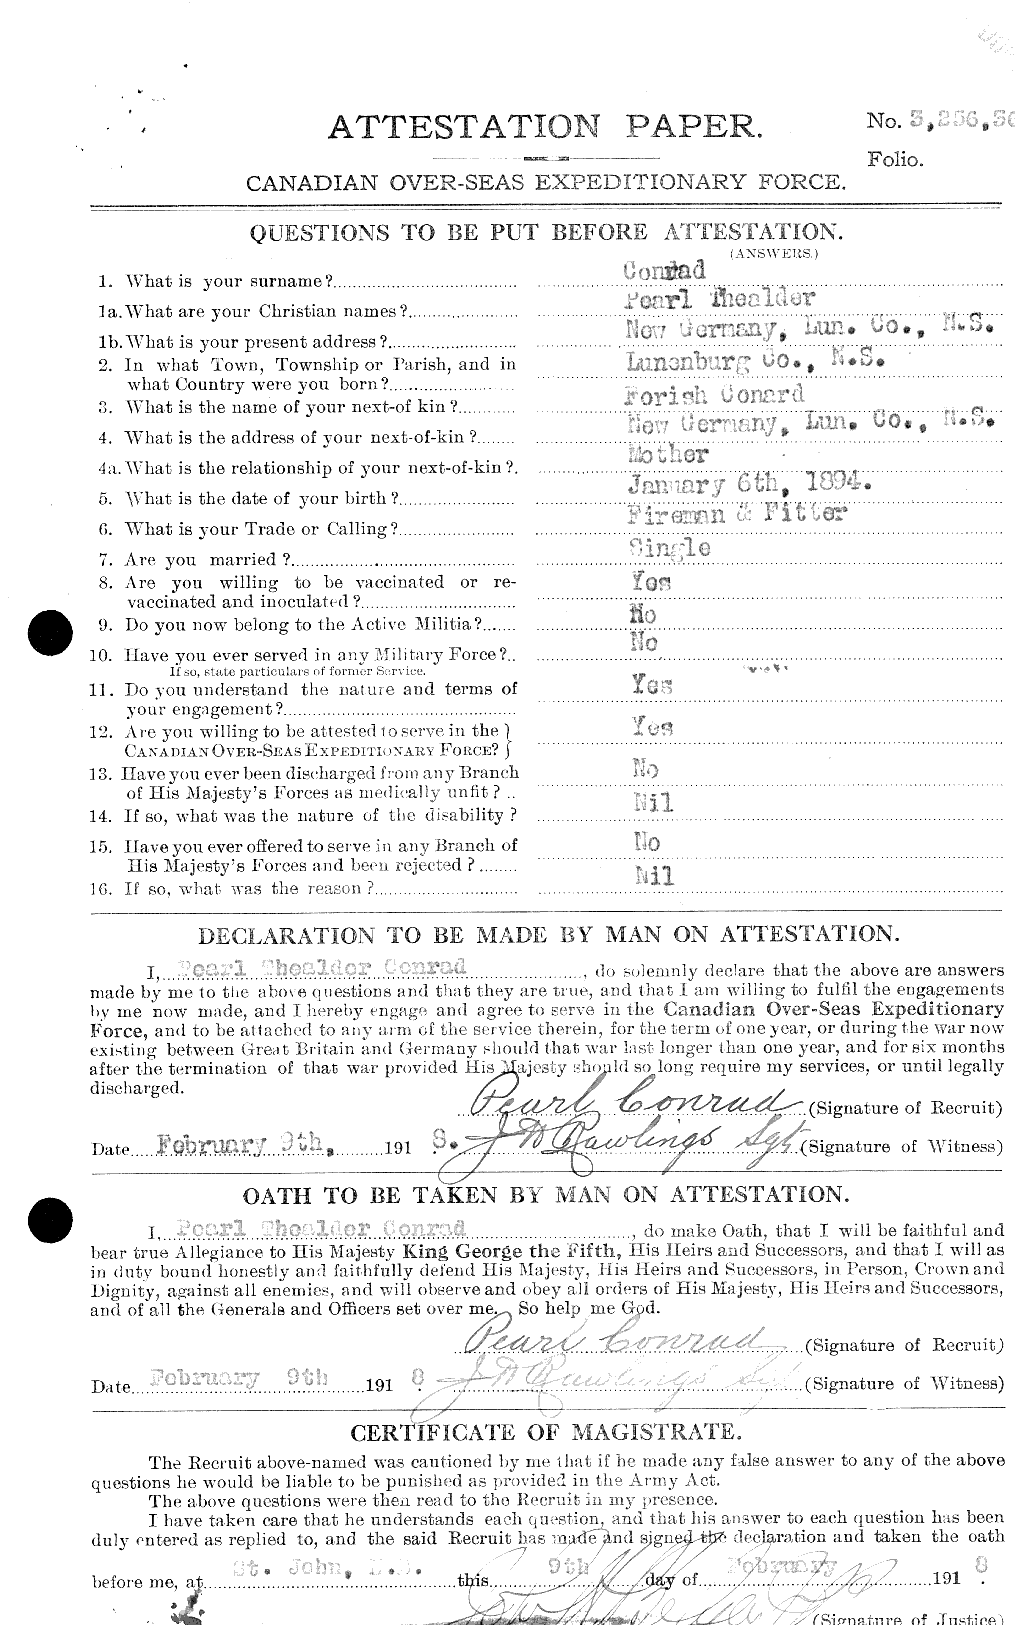 Personnel Records of the First World War - CEF 036144a